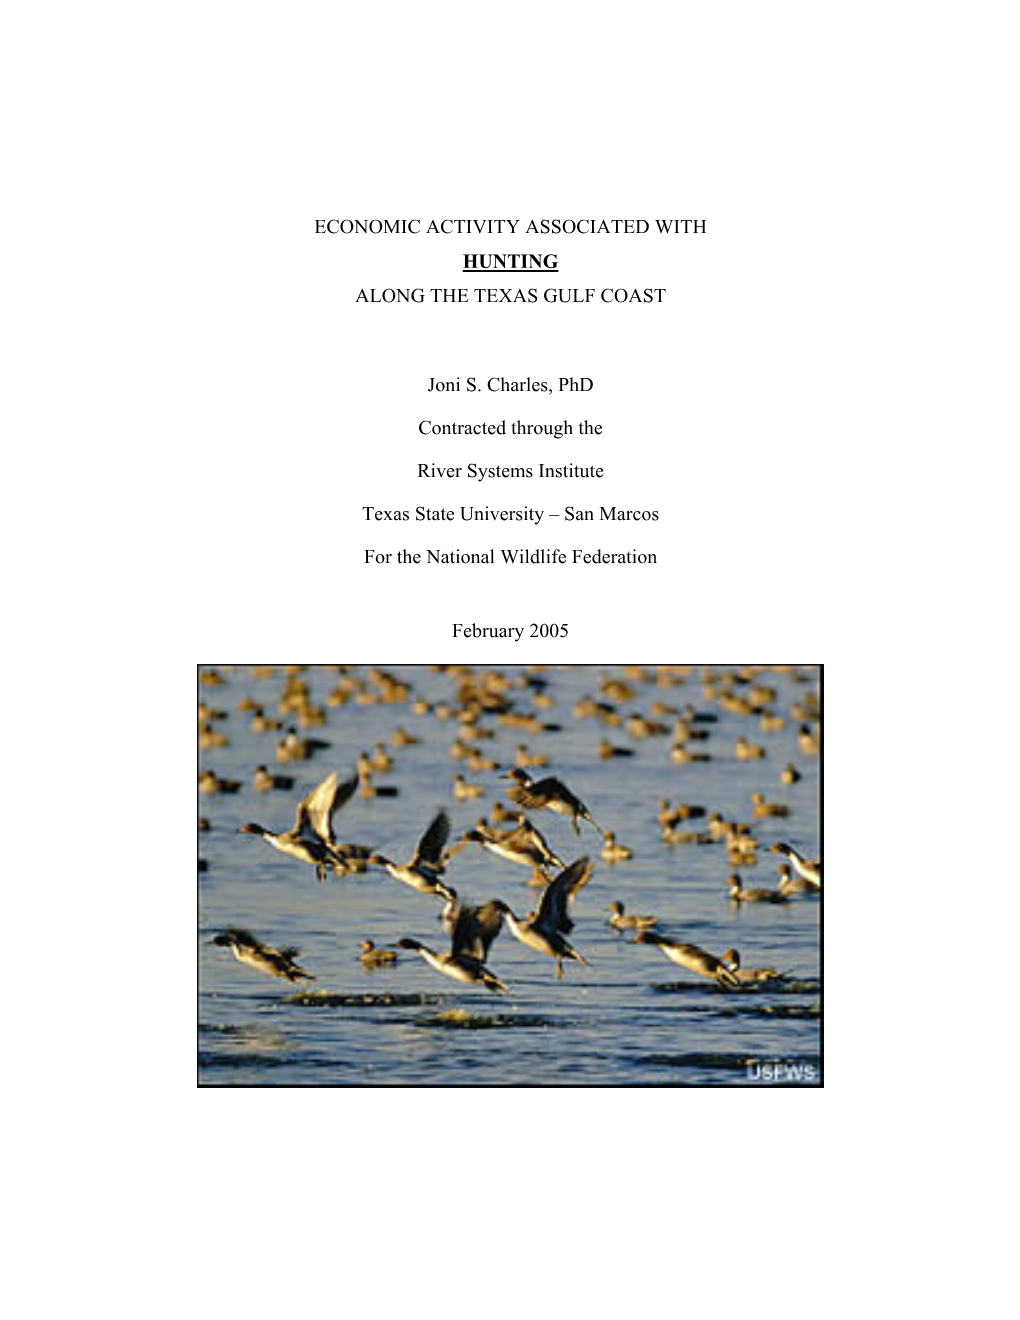 Economic Activity Associated with Hunting Along the Texas Gulf Coast